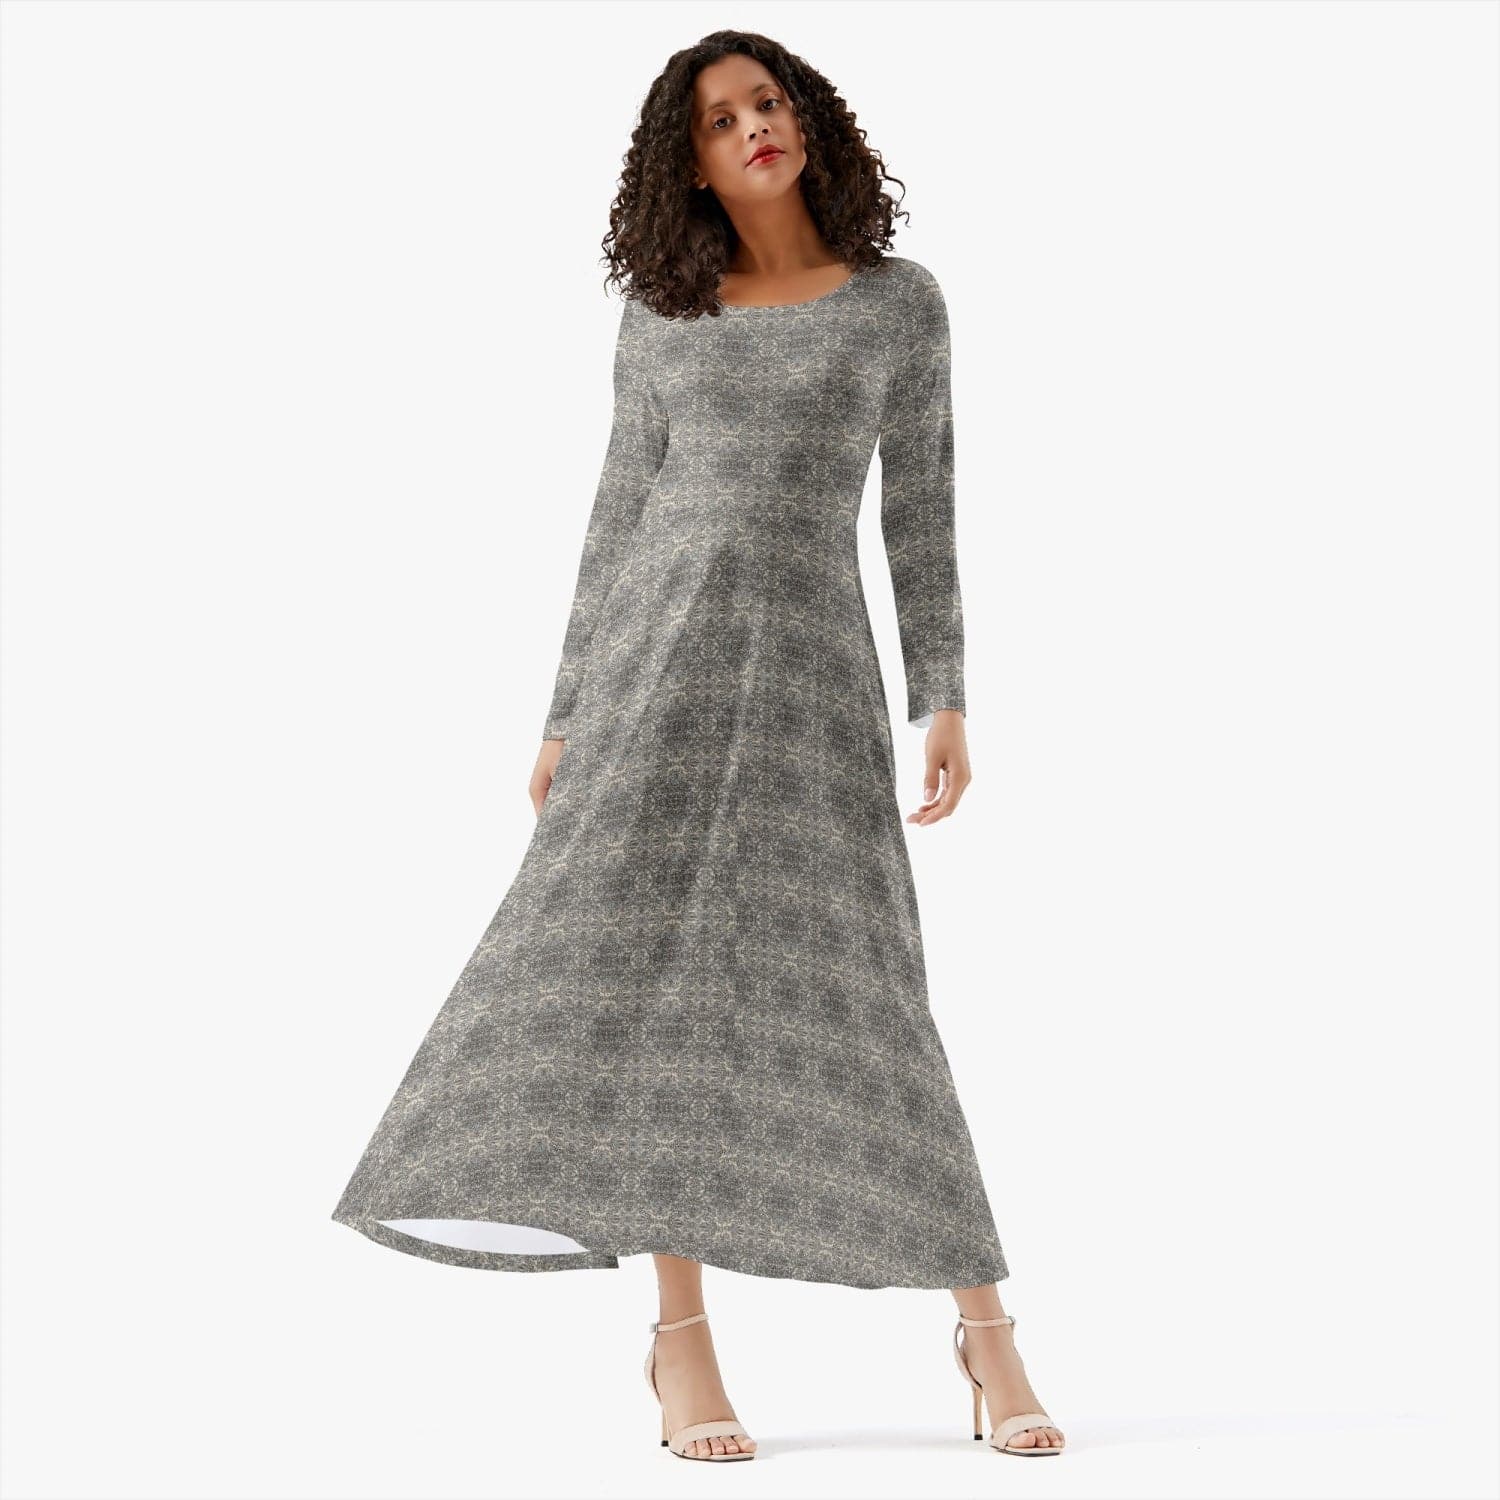 Stars in the Universe, Stylish chique Women's Long-Sleeve One-piece Dress, by Sensus Studio Design